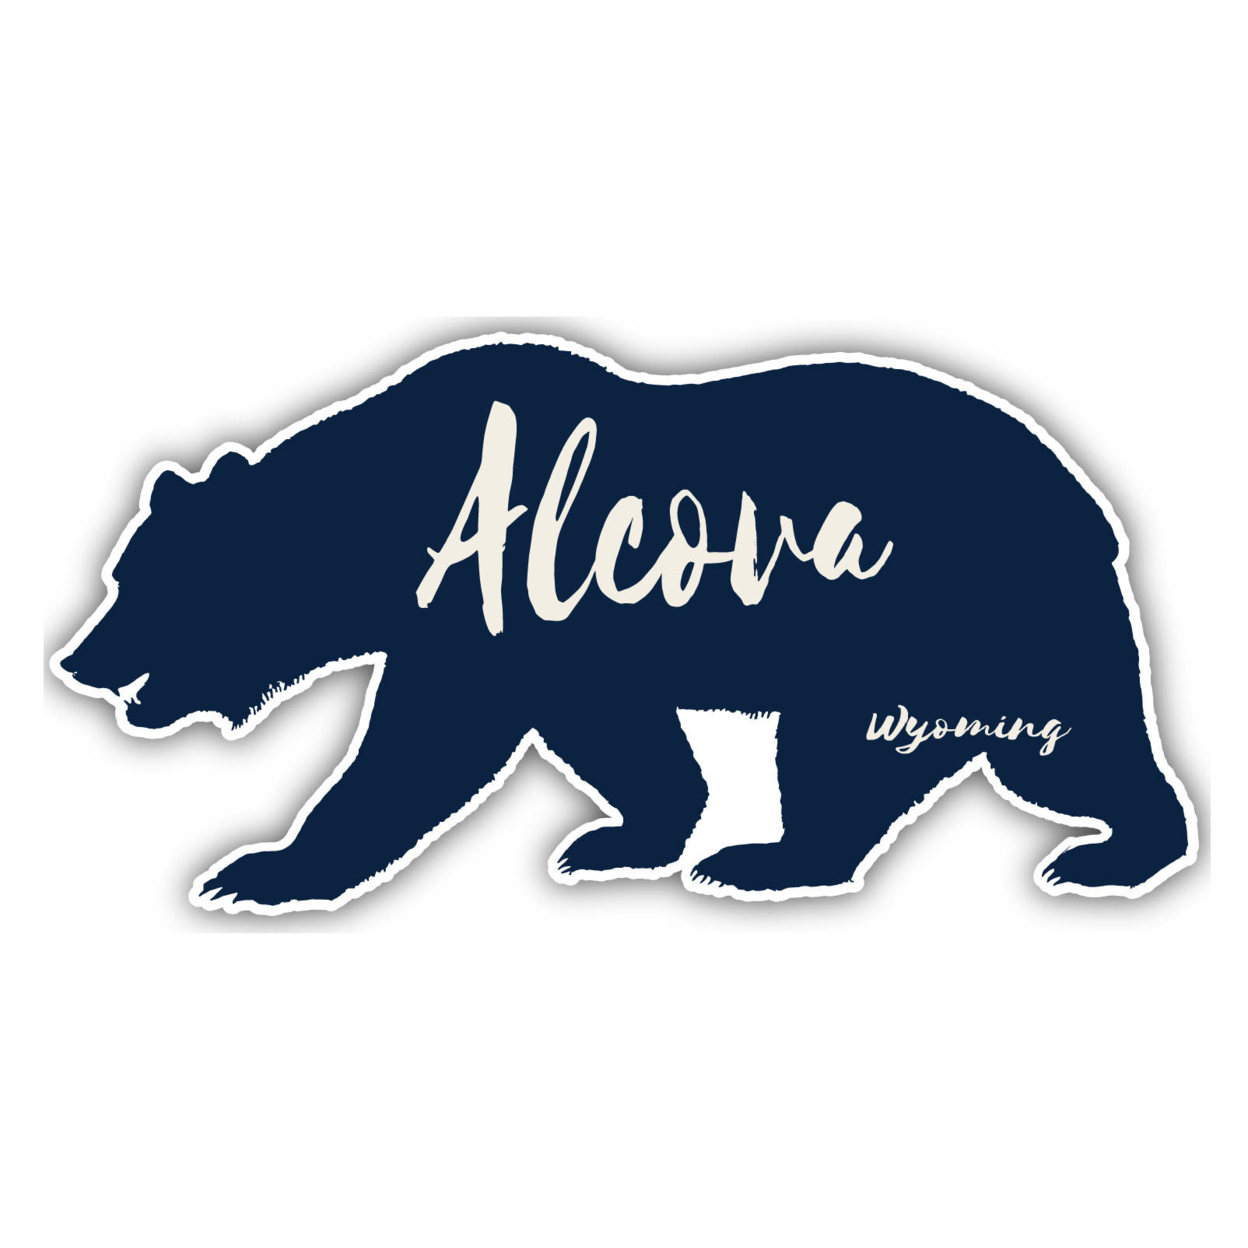 Alcova Wyoming Souvenir Decorative Stickers (Choose Theme And Size) - 4-Pack, 6-Inch, Tent